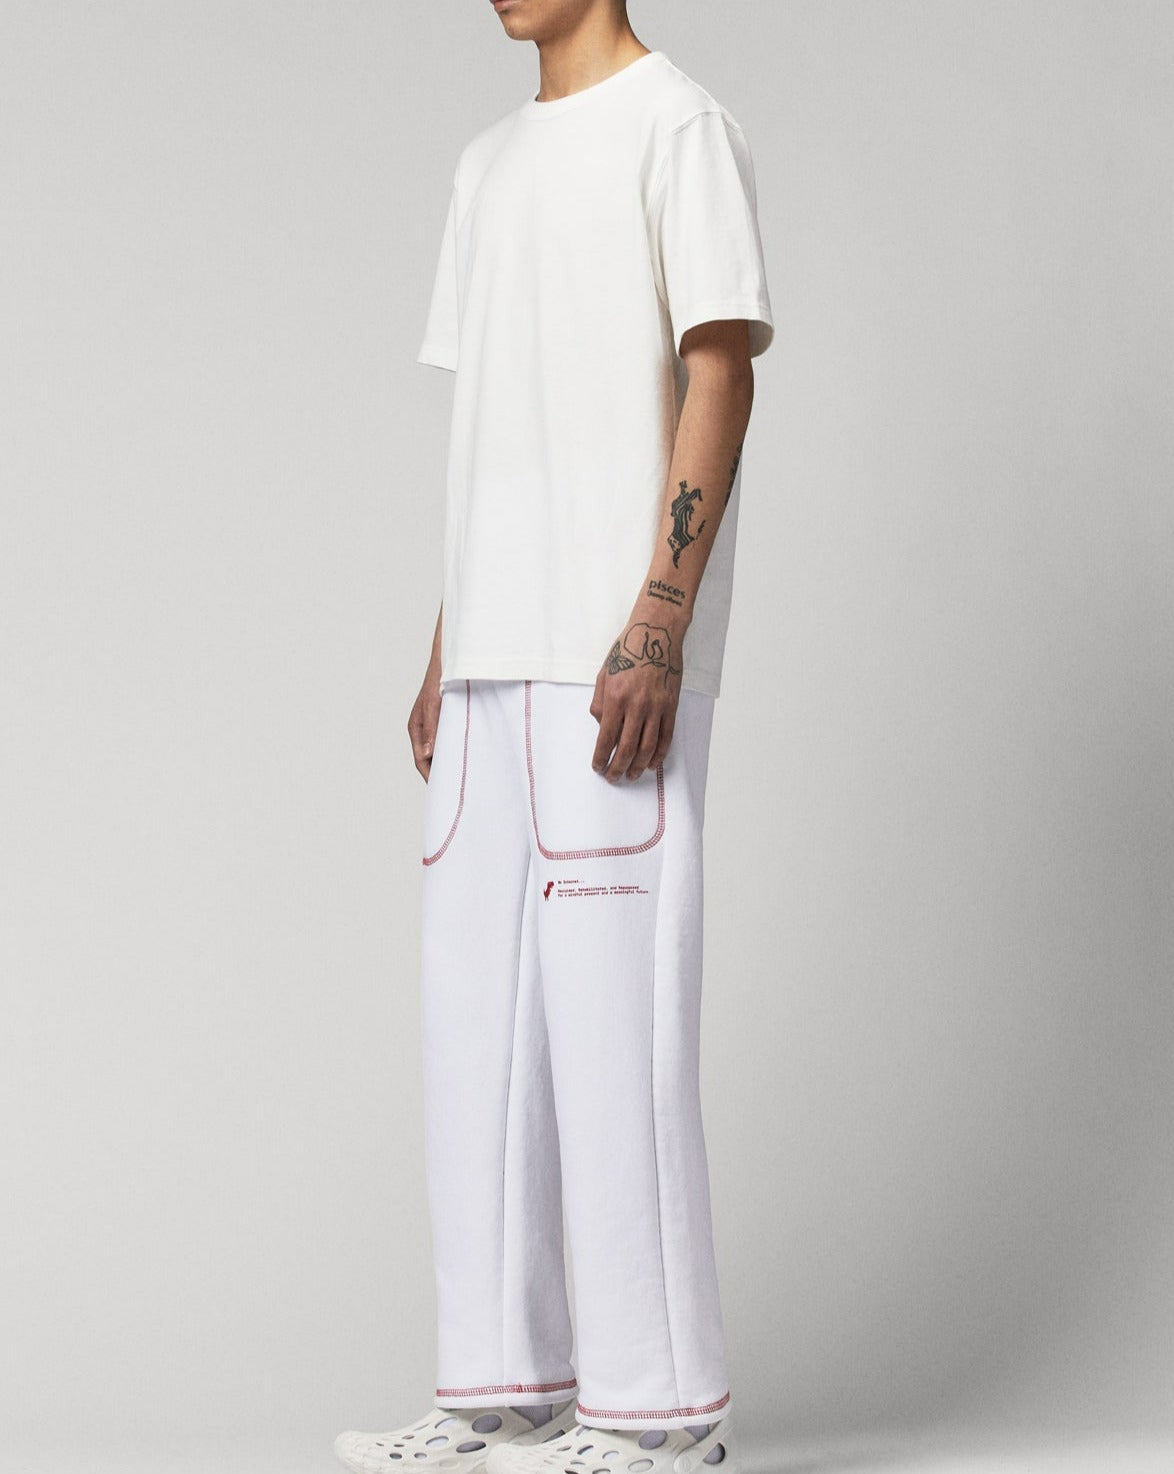 THE ARRIVALS RESOURCE PANT